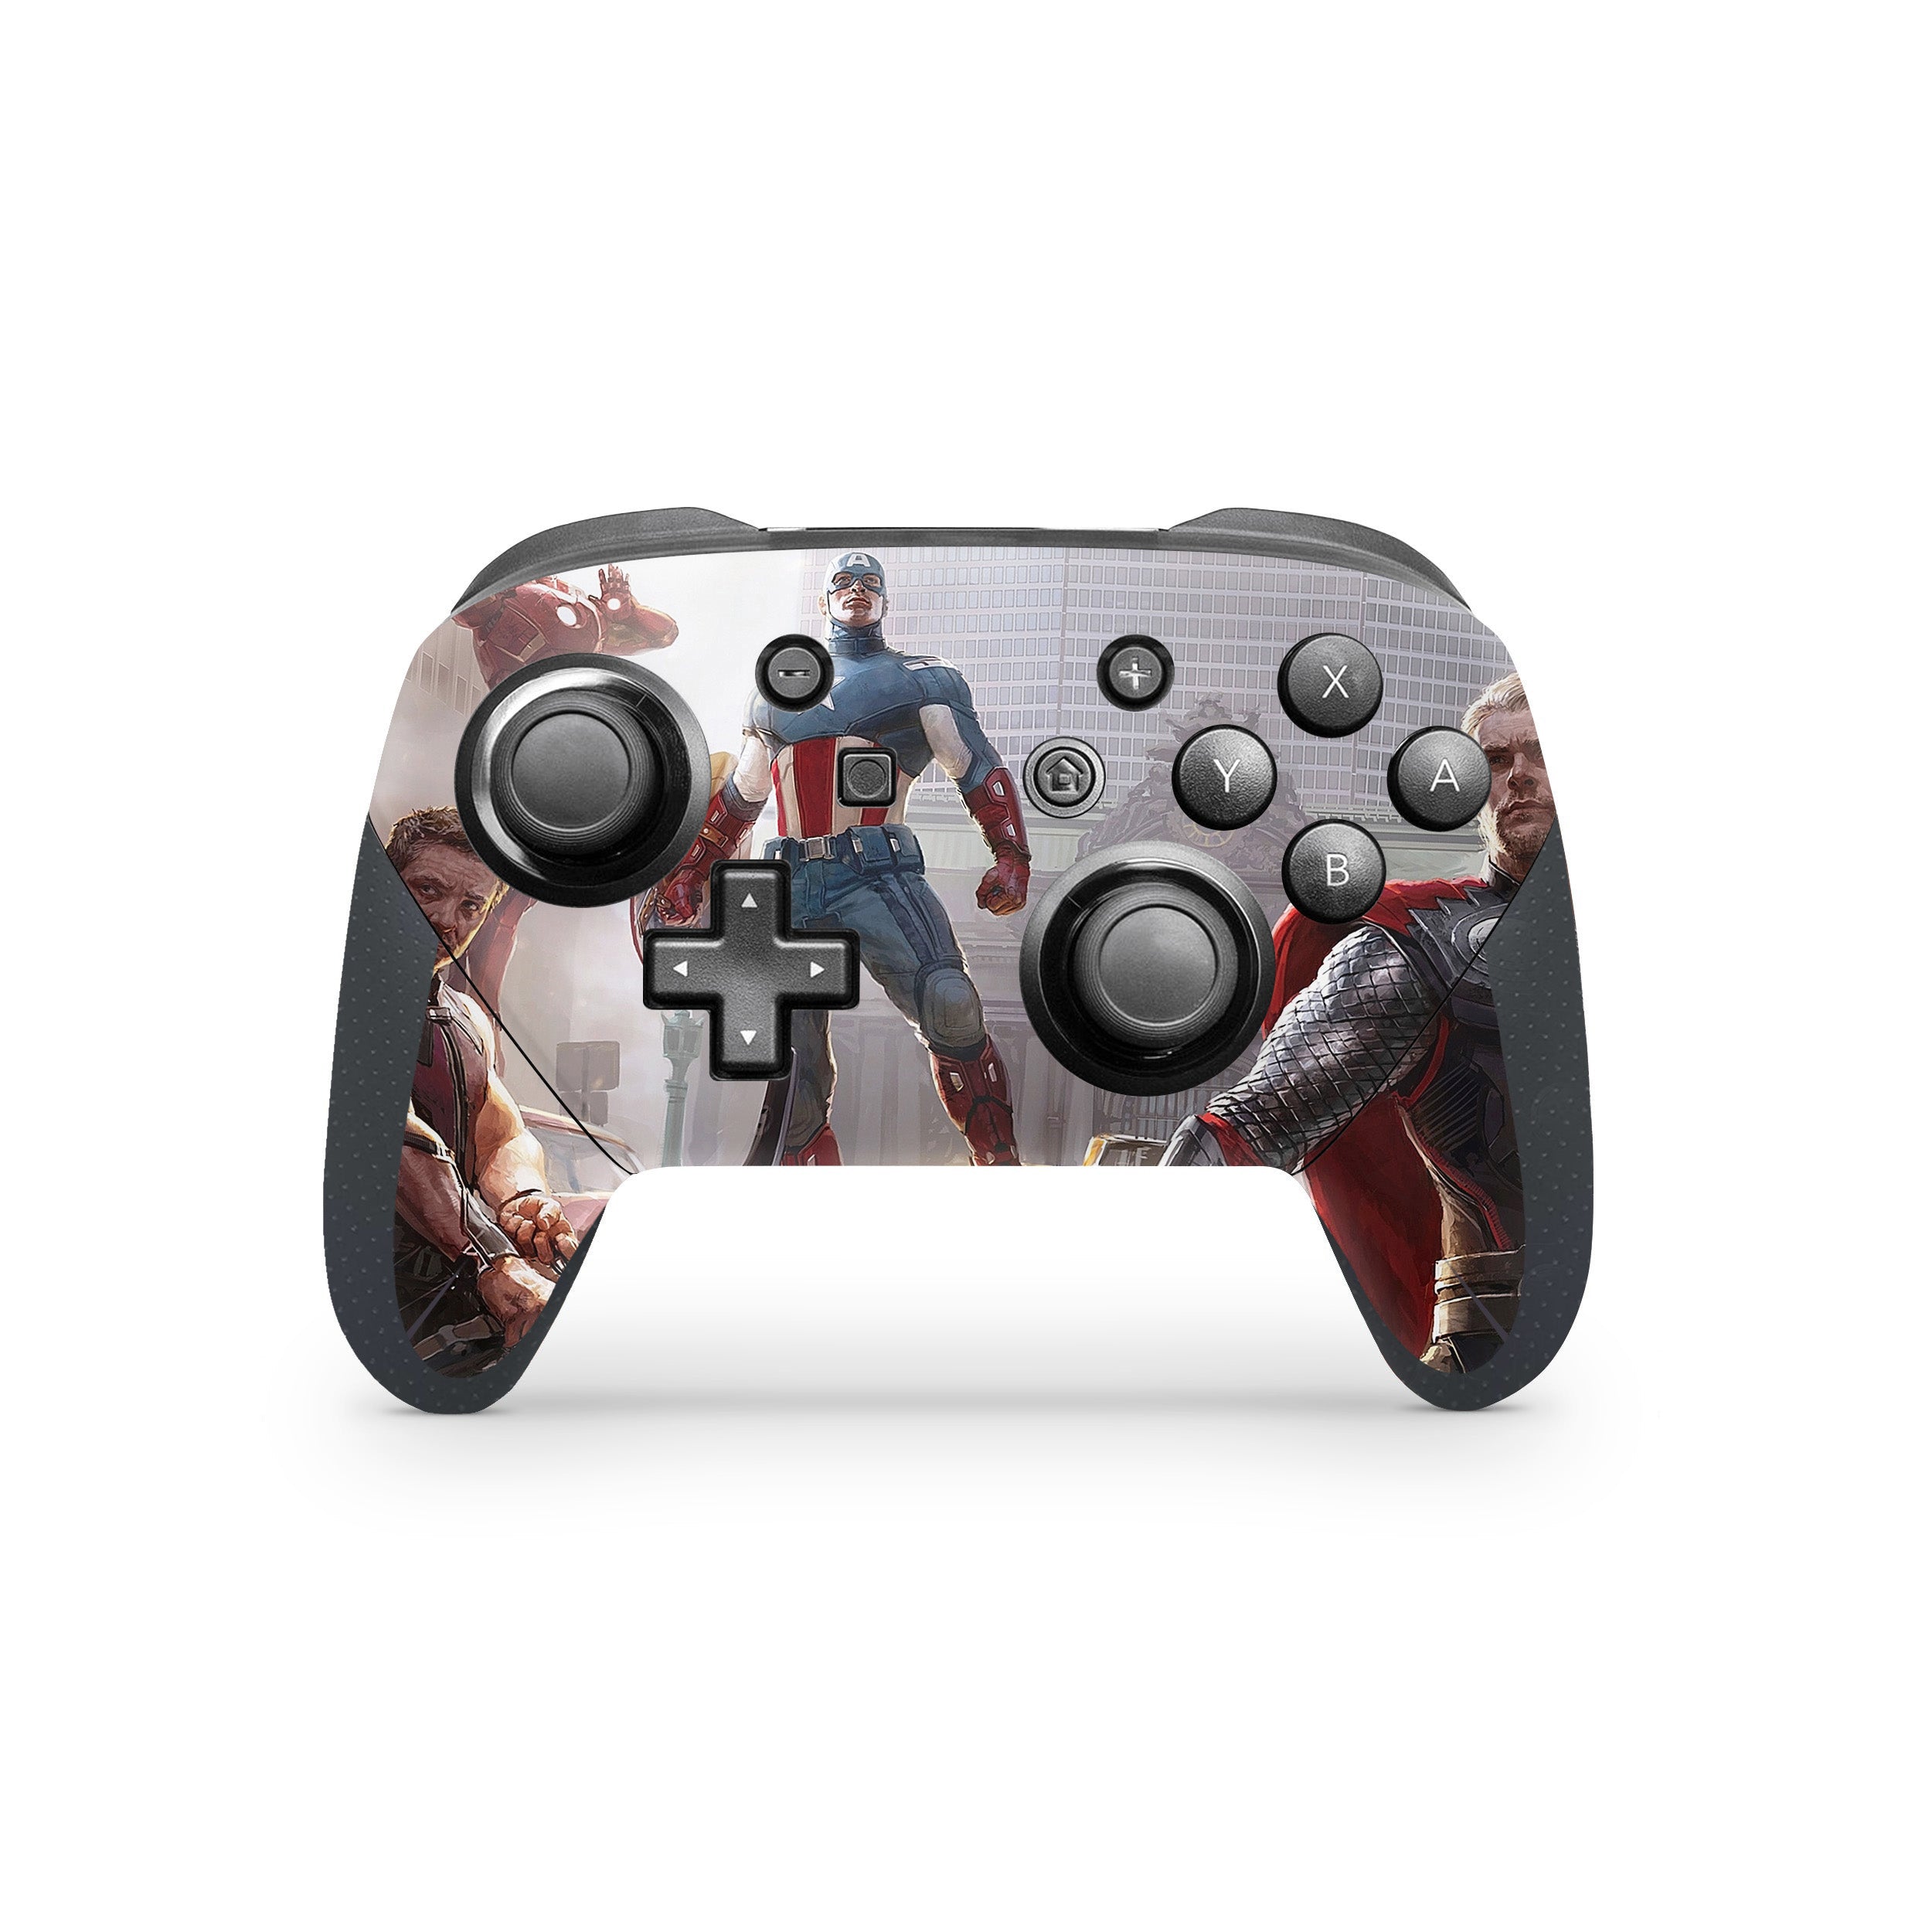 A video game skin featuring a Marvel Avengers design for the Switch Pro Controller.